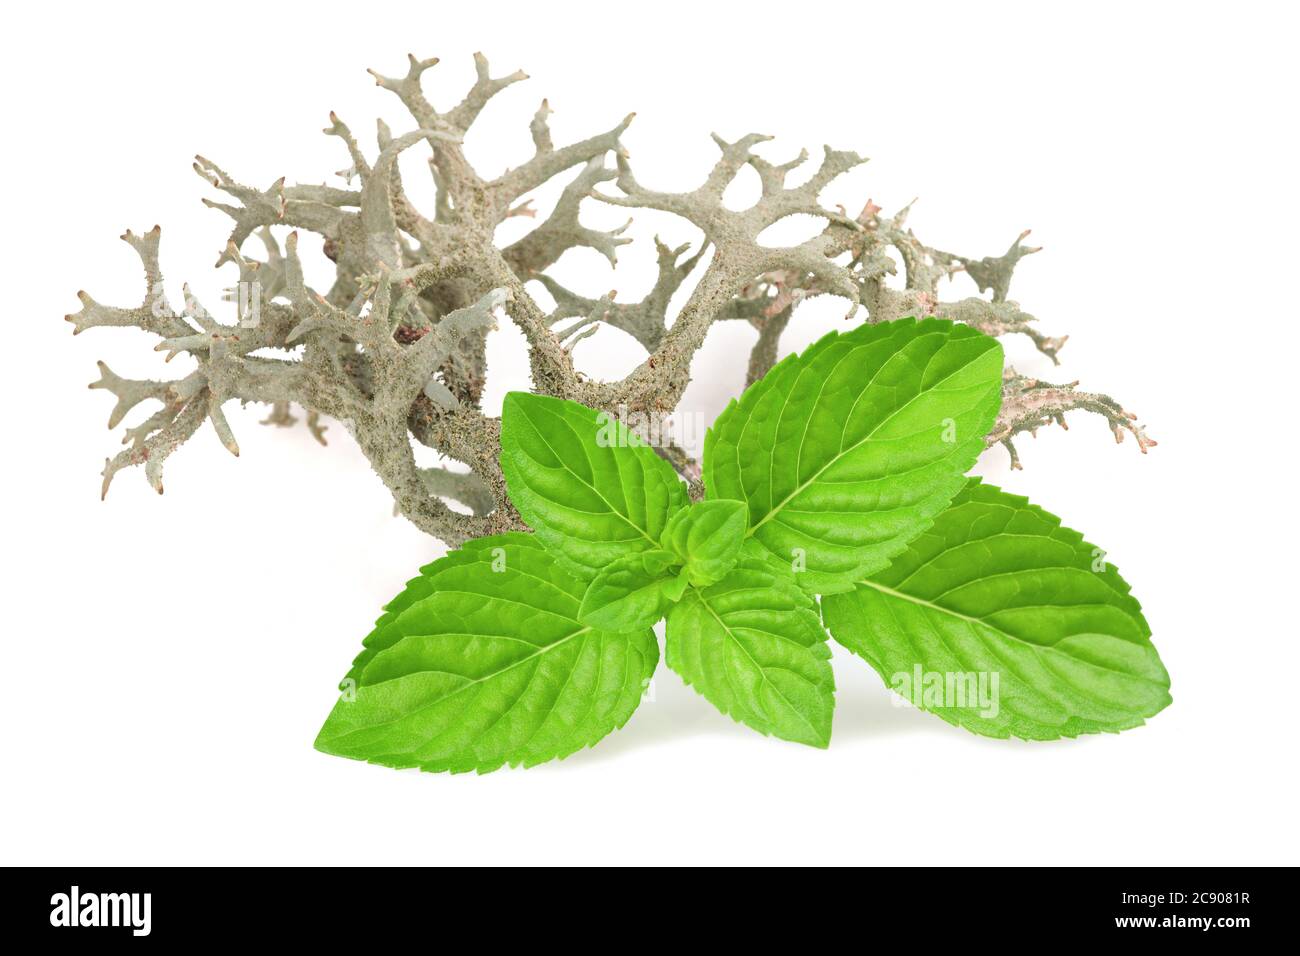 Iceland Moss and mint isolated on white Stock Photo